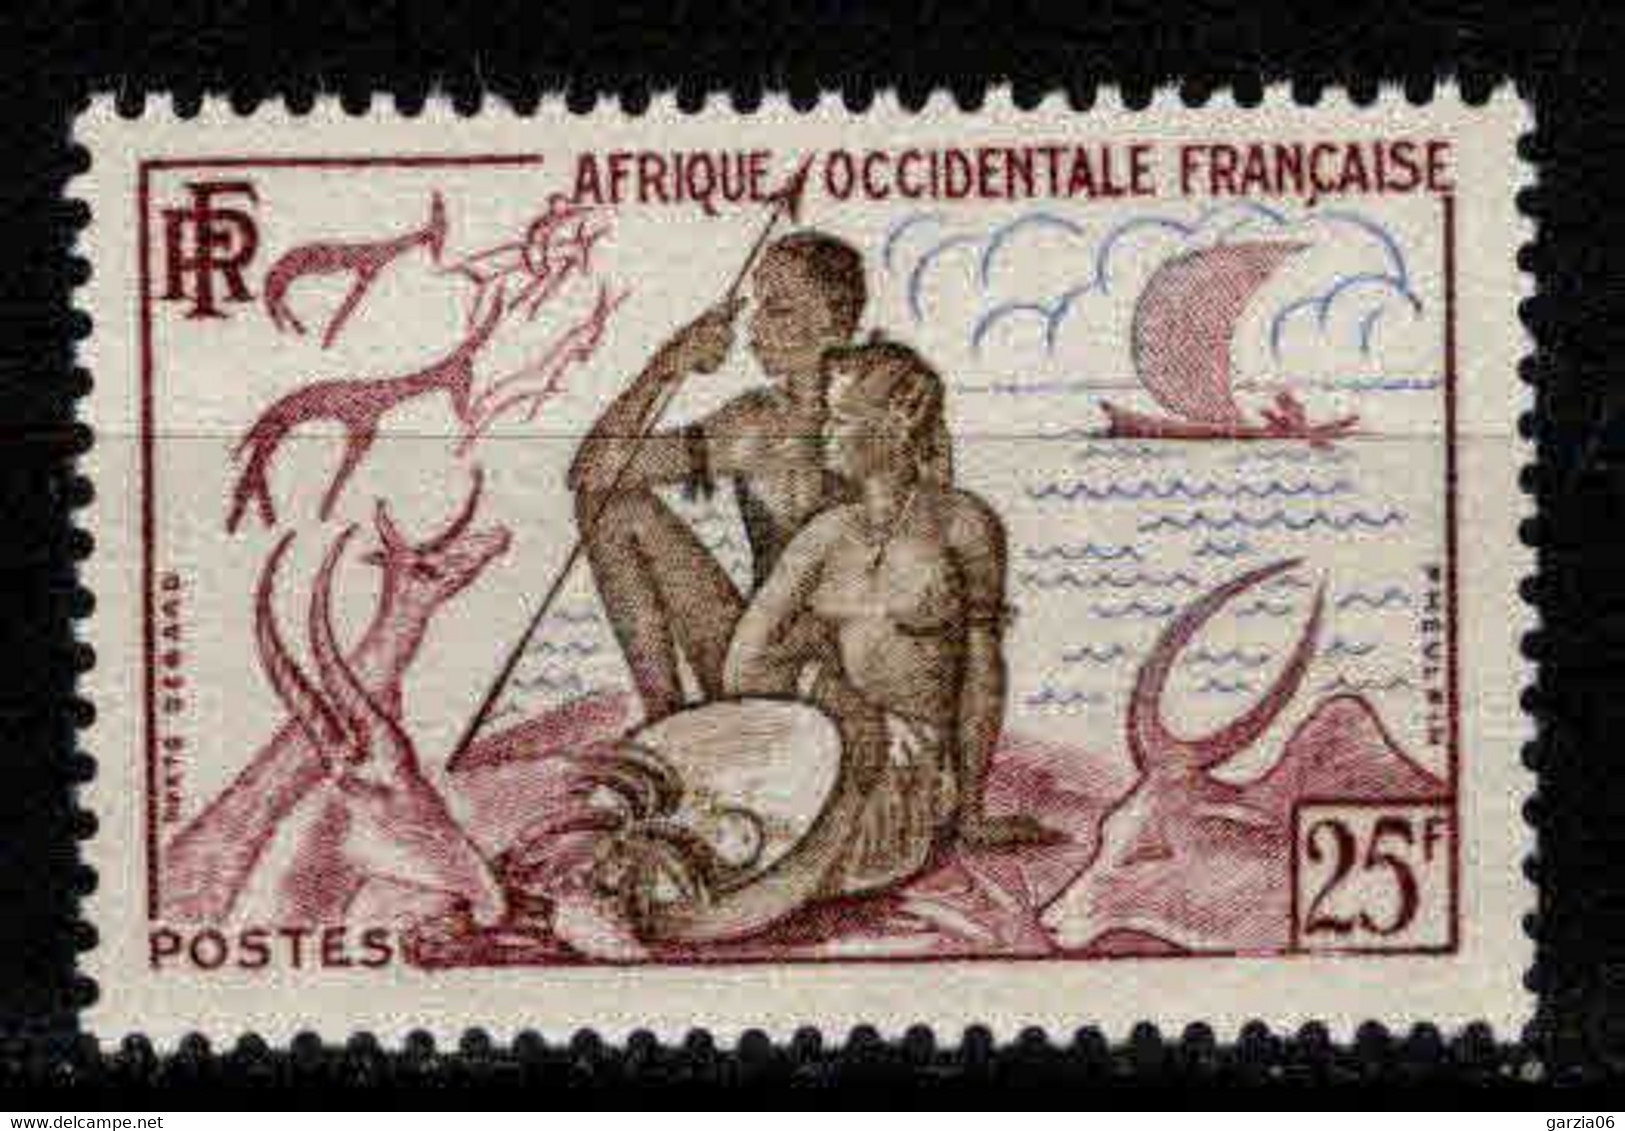 AOF - 1954 - Chasse Et Pêche - N° 48  - Neufs ** - MNH - Nuovi